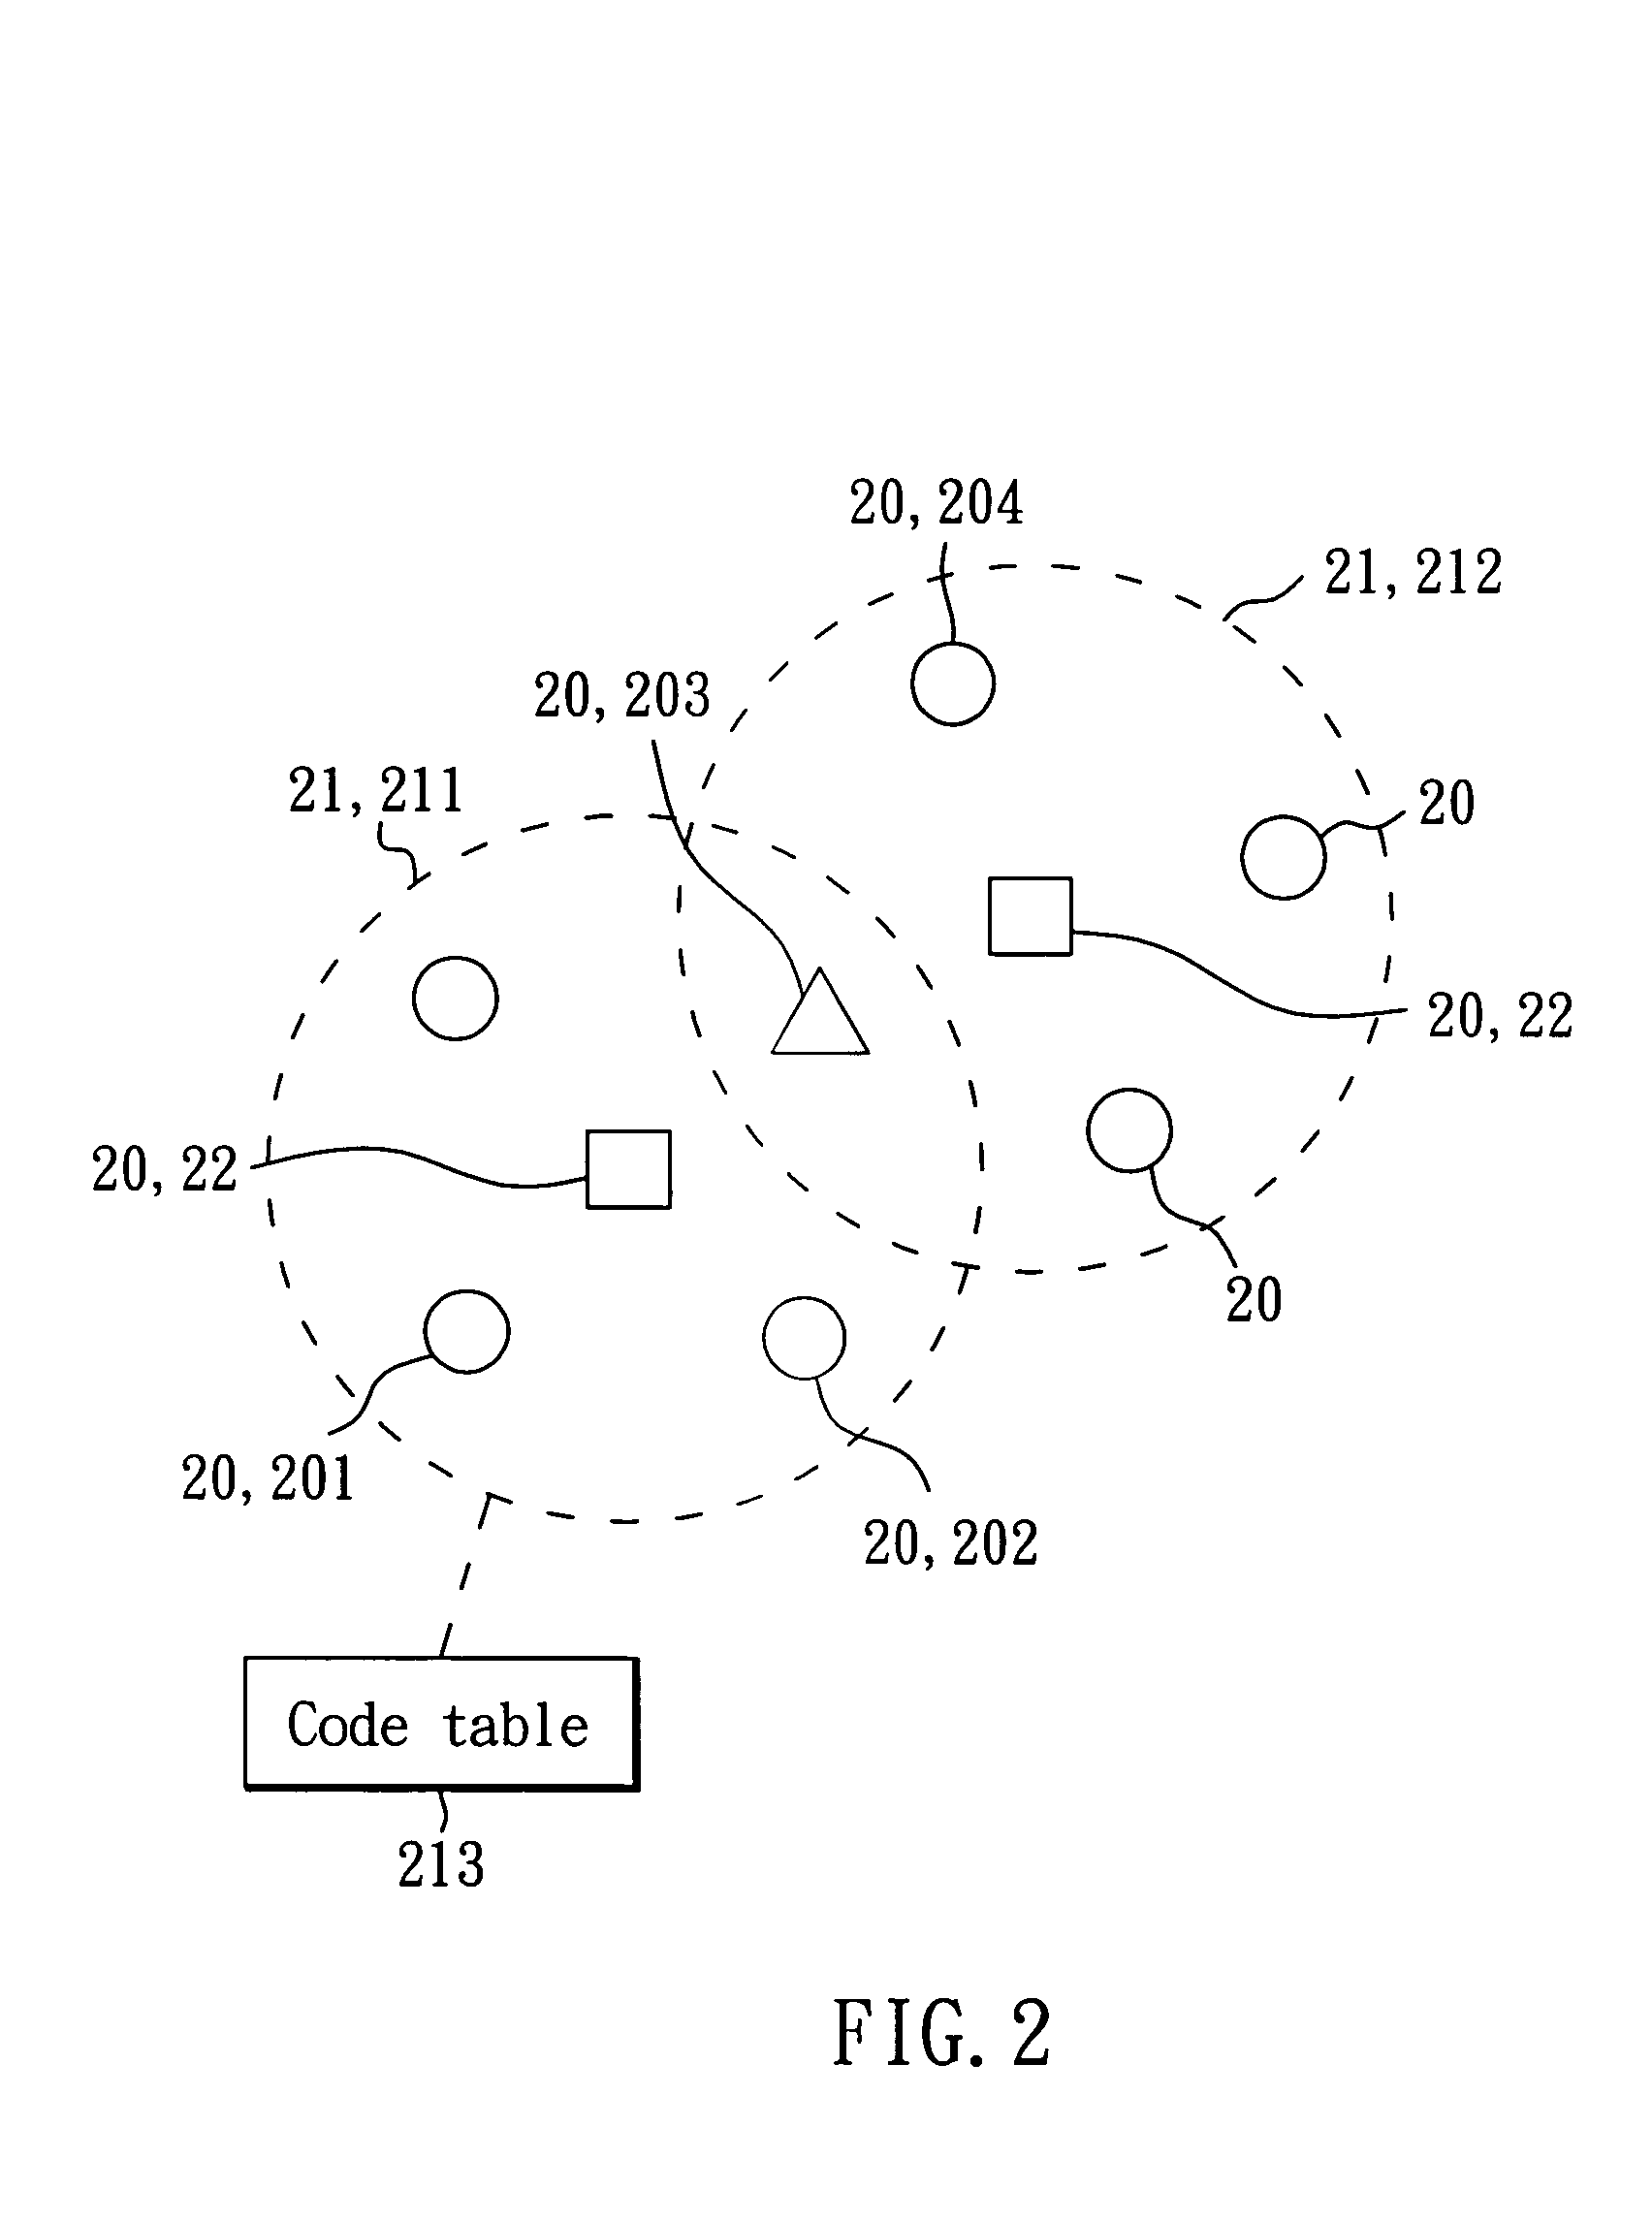 Channel assigning method for ad-hoc network